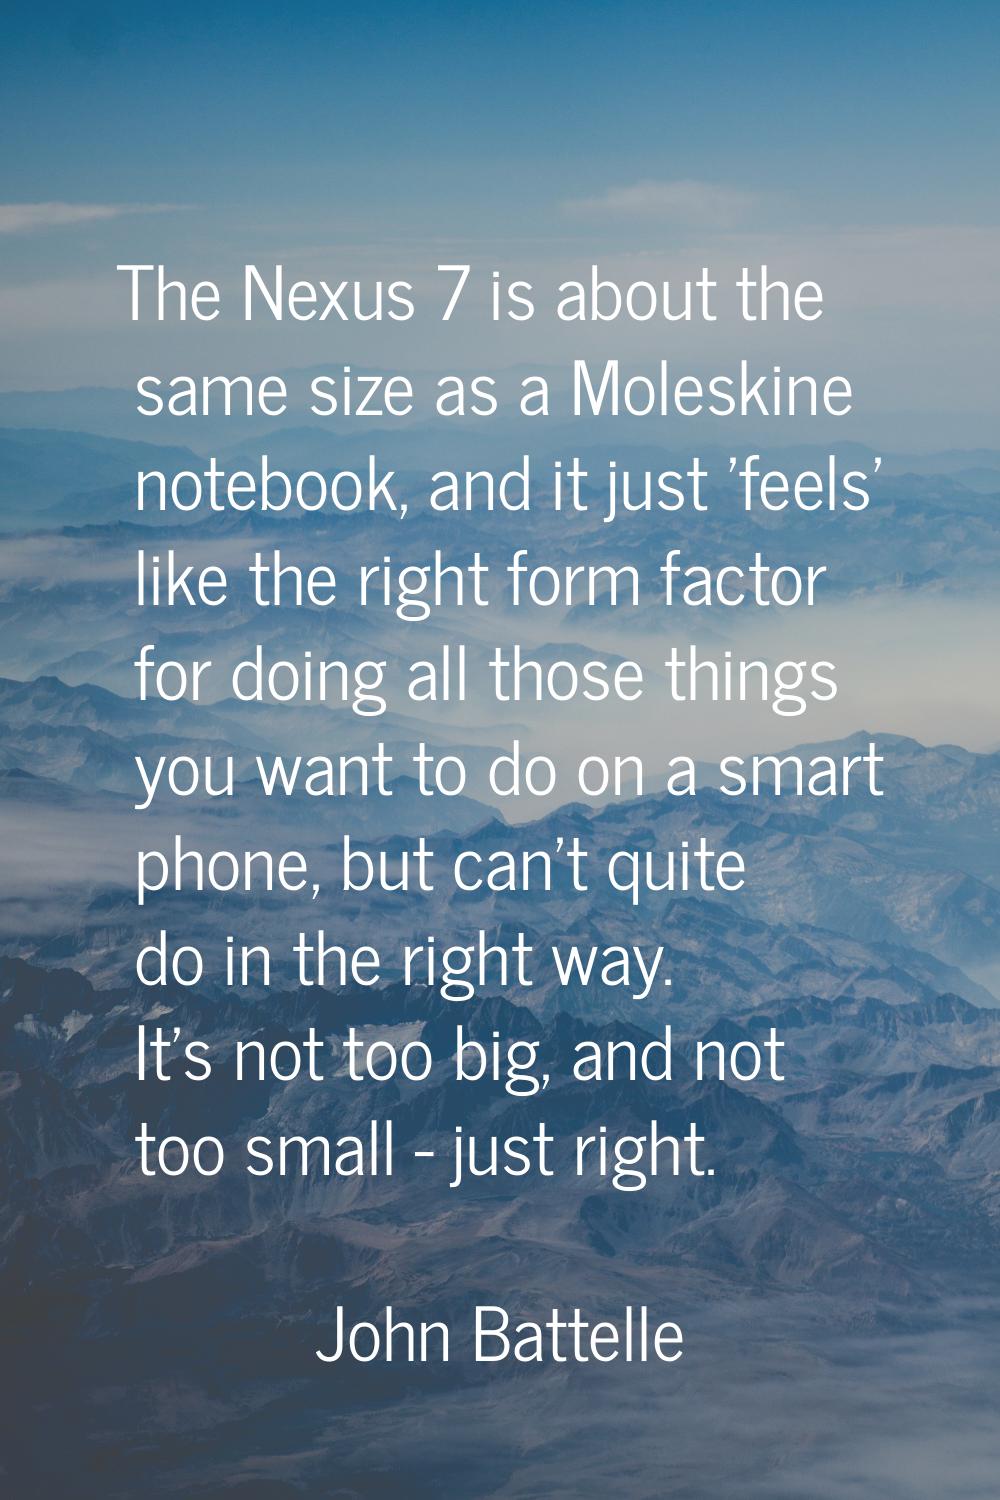 The Nexus 7 is about the same size as a Moleskine notebook, and it just 'feels' like the right form